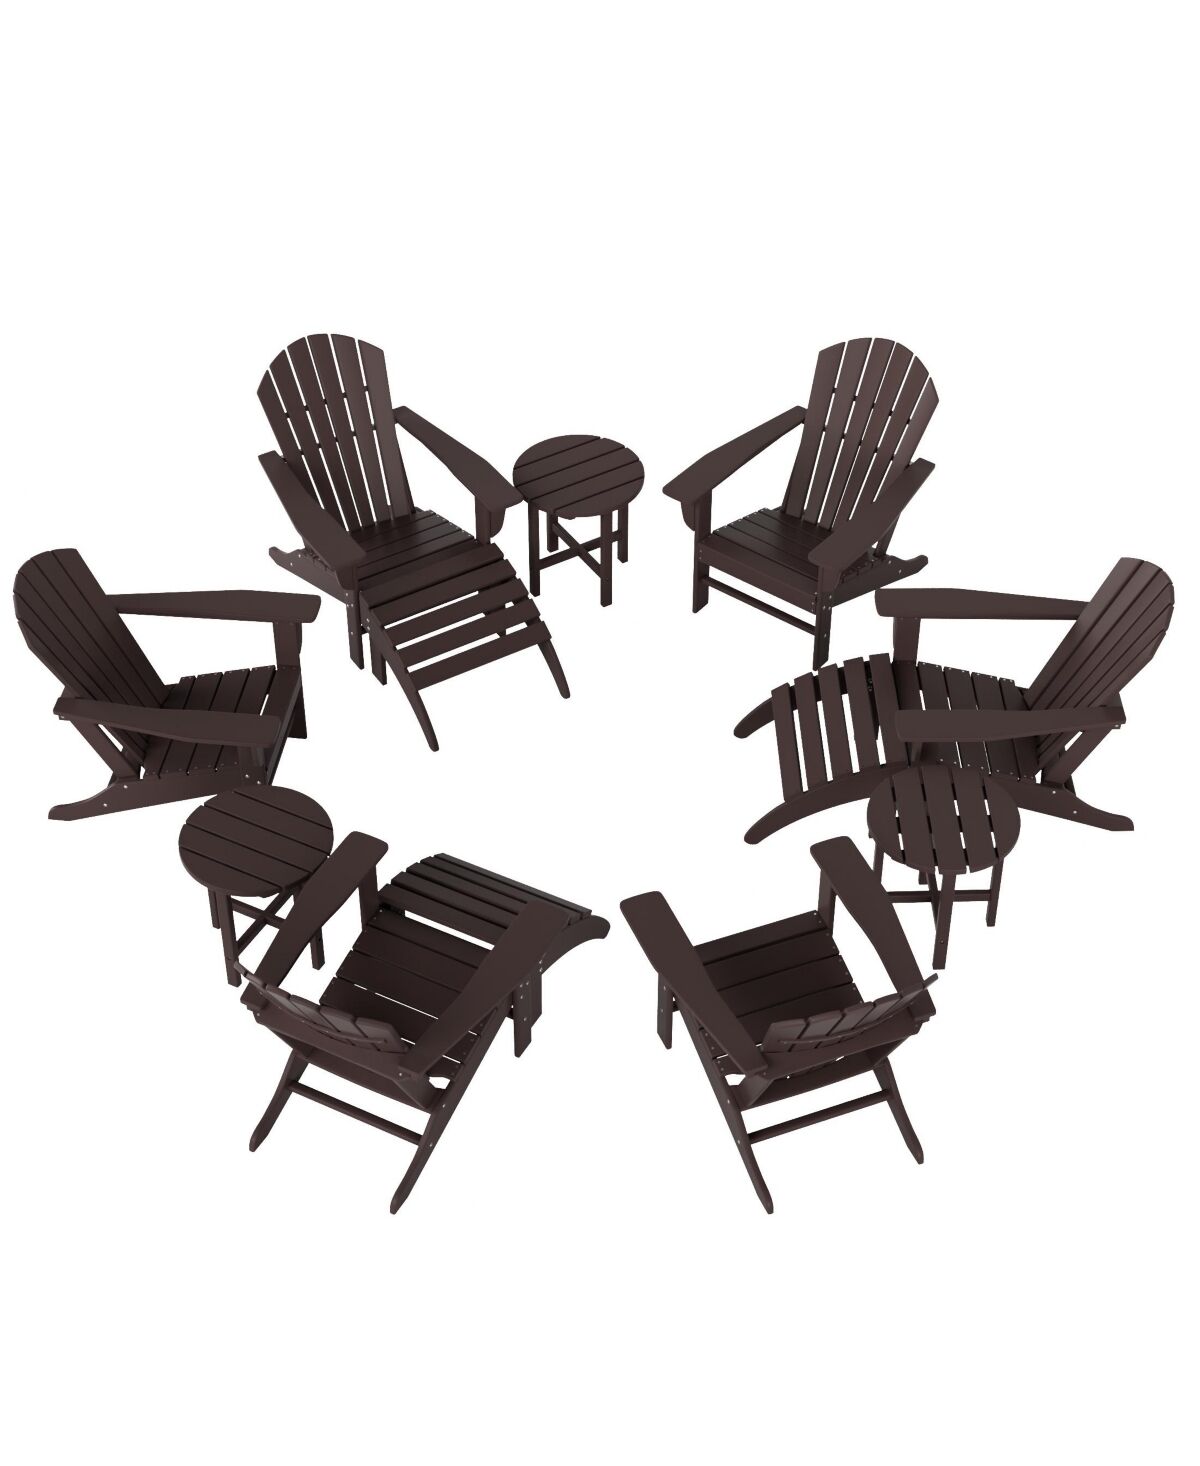 Westintrends 12 Piece Set Outdoor Adirondack Chair With Ottoman Side Table - Dark Brown